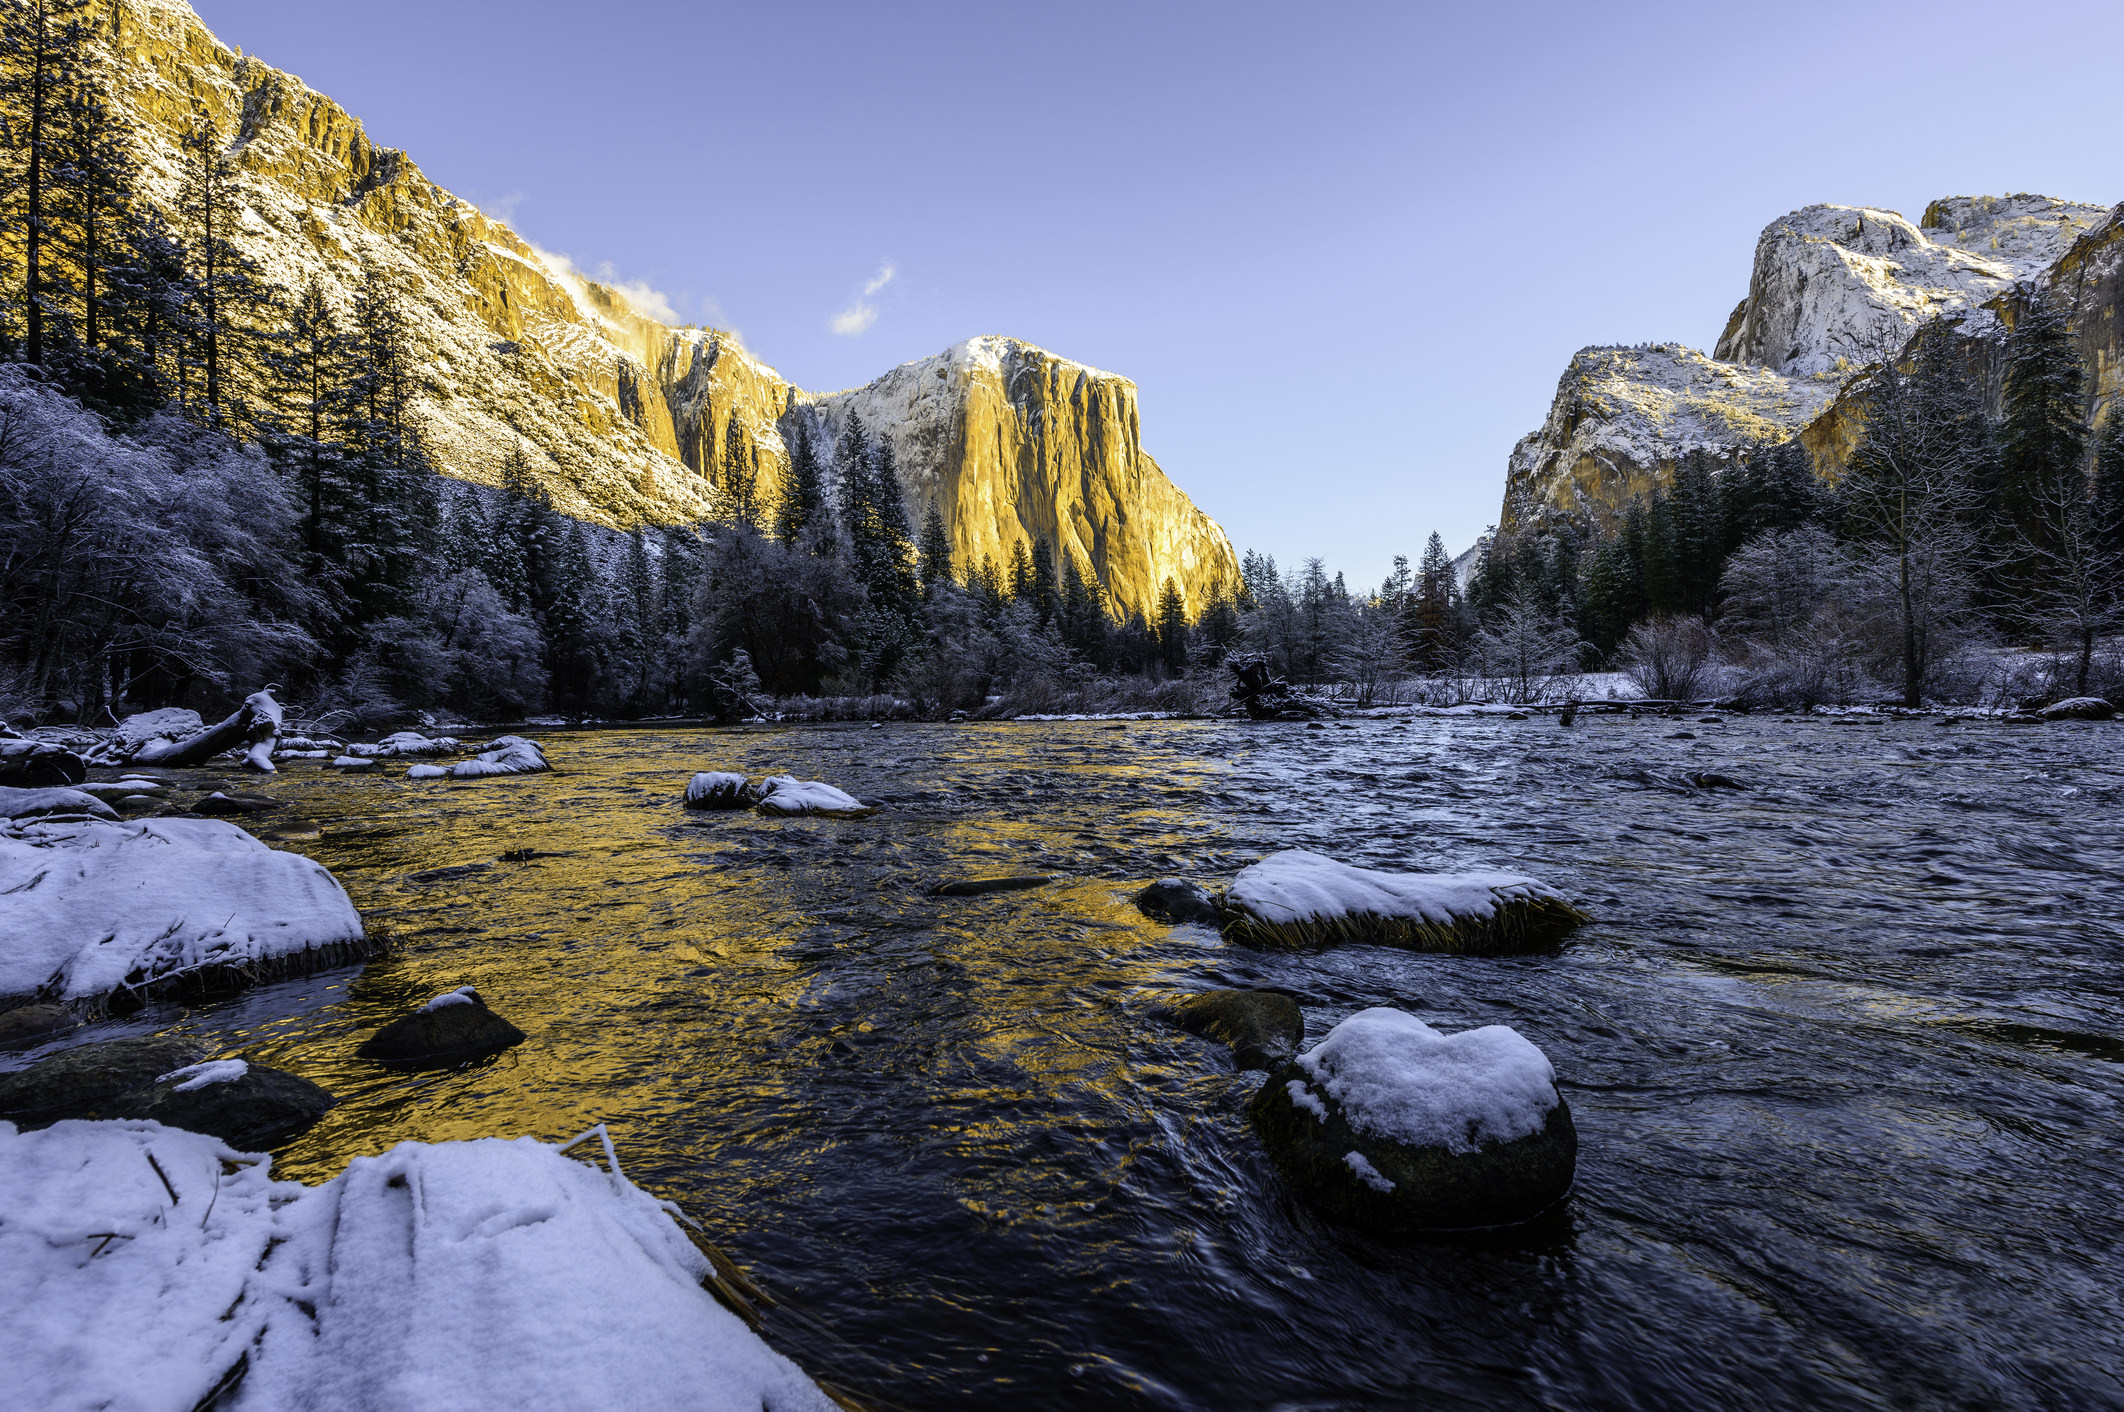 Landscape Photography Primer: Getting Sharp Images With Depth of ...